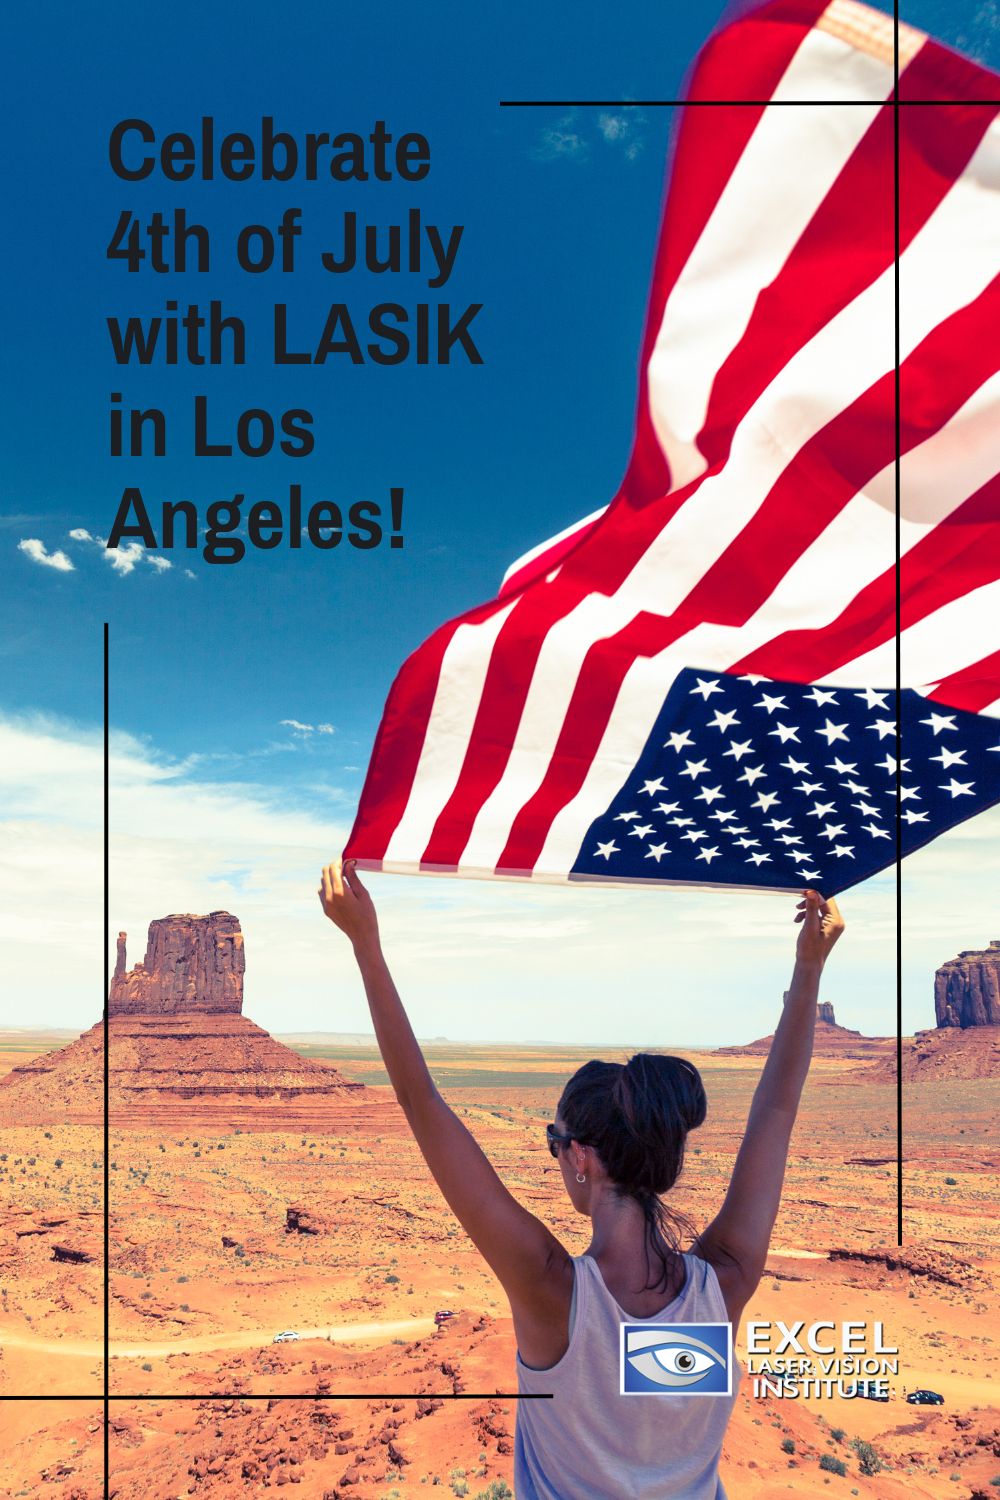 give-the-gift-of-lasik-los-angeles-for-4th-of-july-Pinterest-Pin